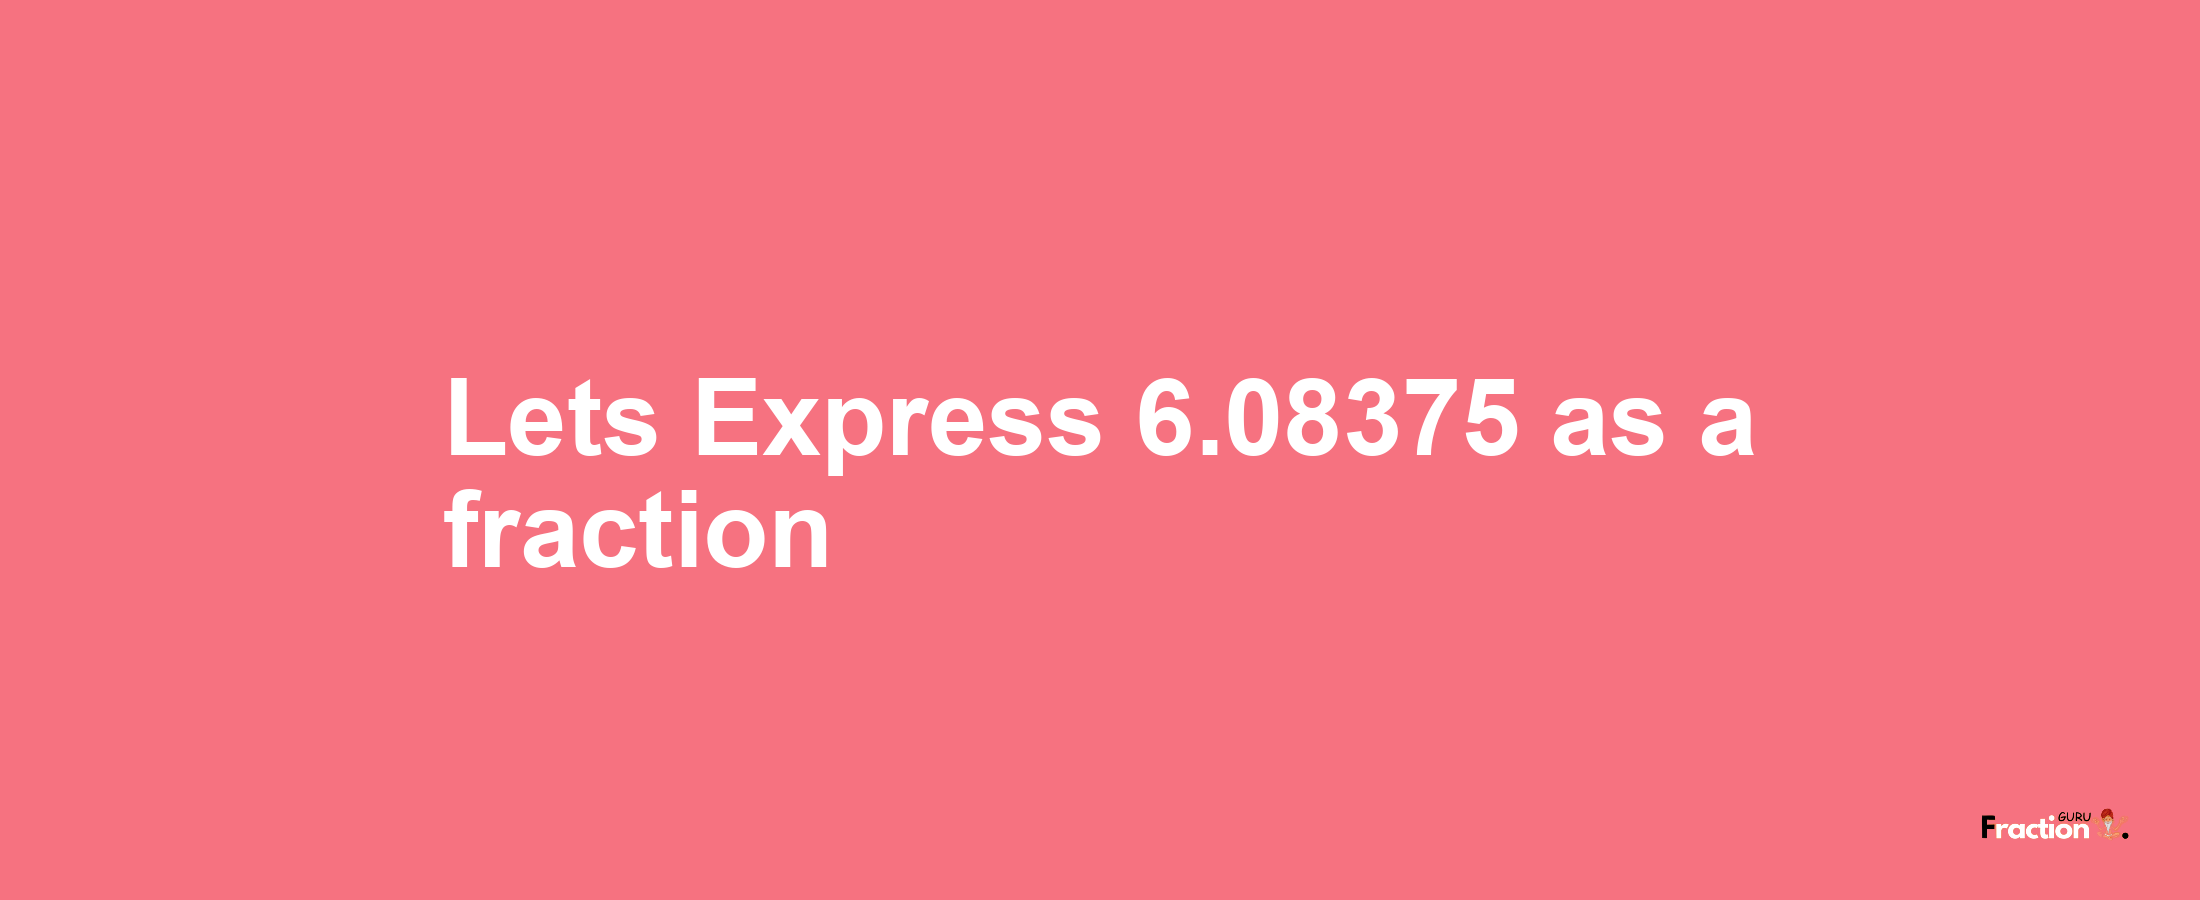 Lets Express 6.08375 as afraction